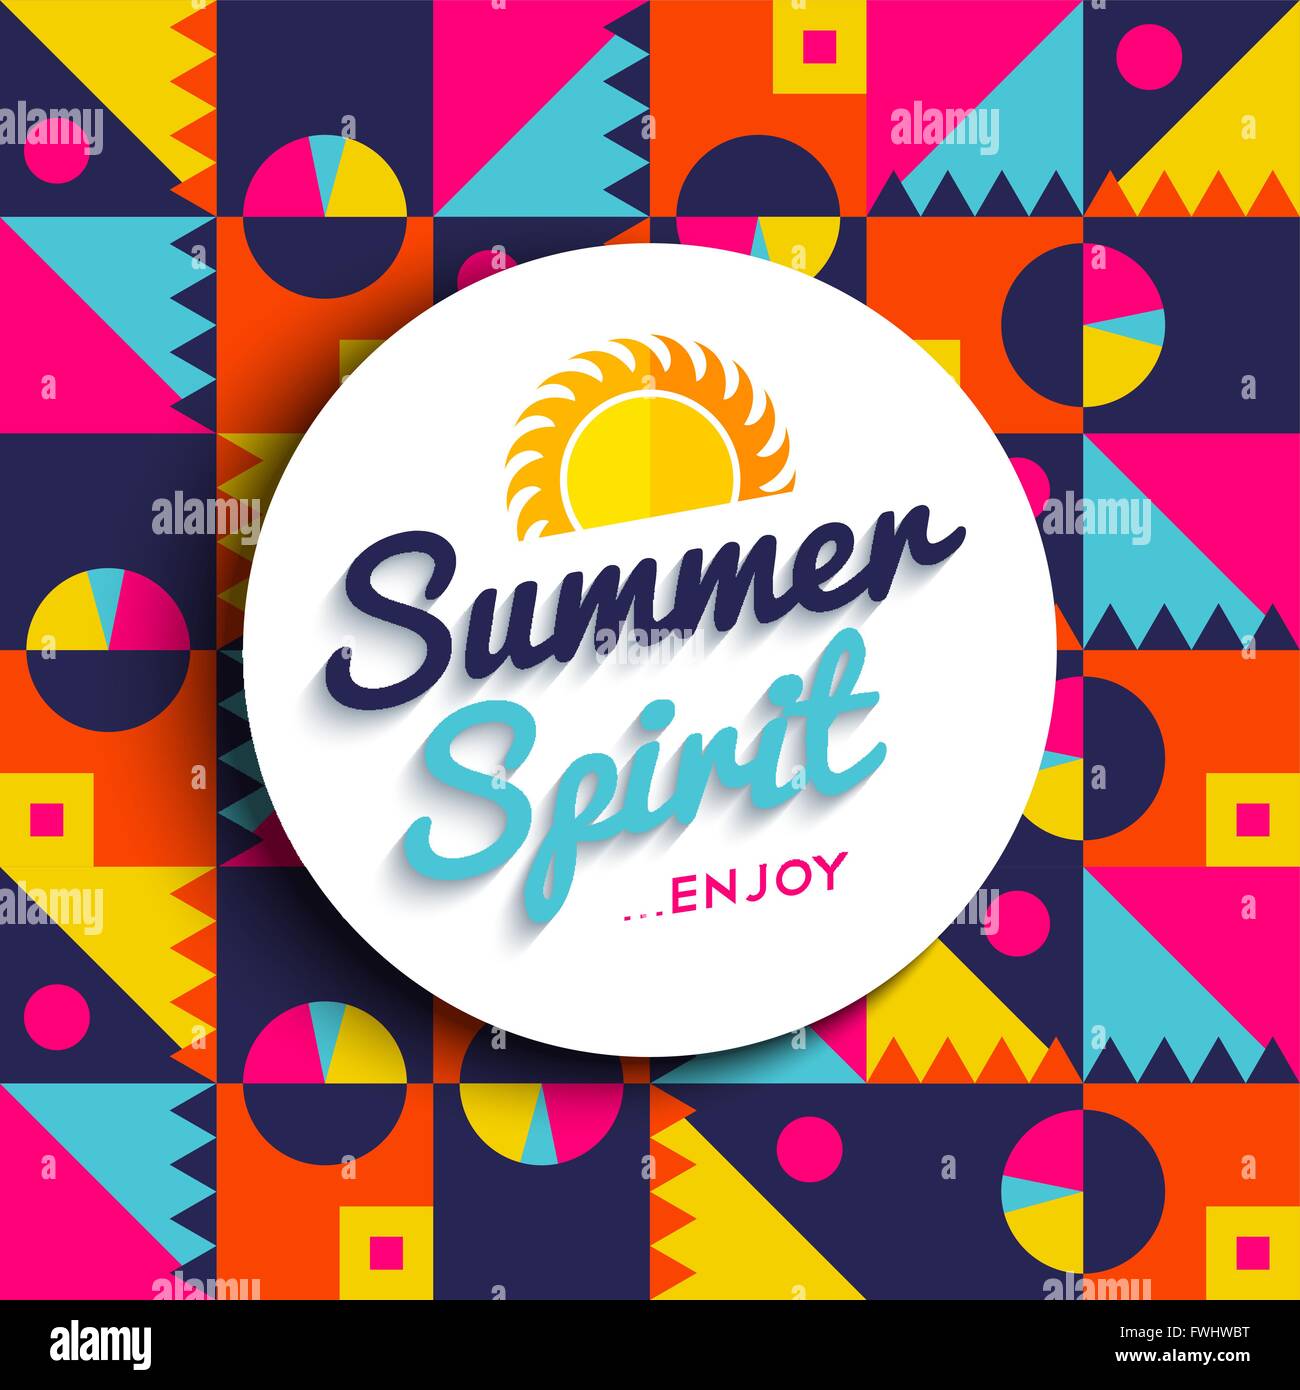 Summer spirit quote poster, enjoy your summertime vacations text with sun decoration on colorful geometric background. EPS10 vec Stock Vector